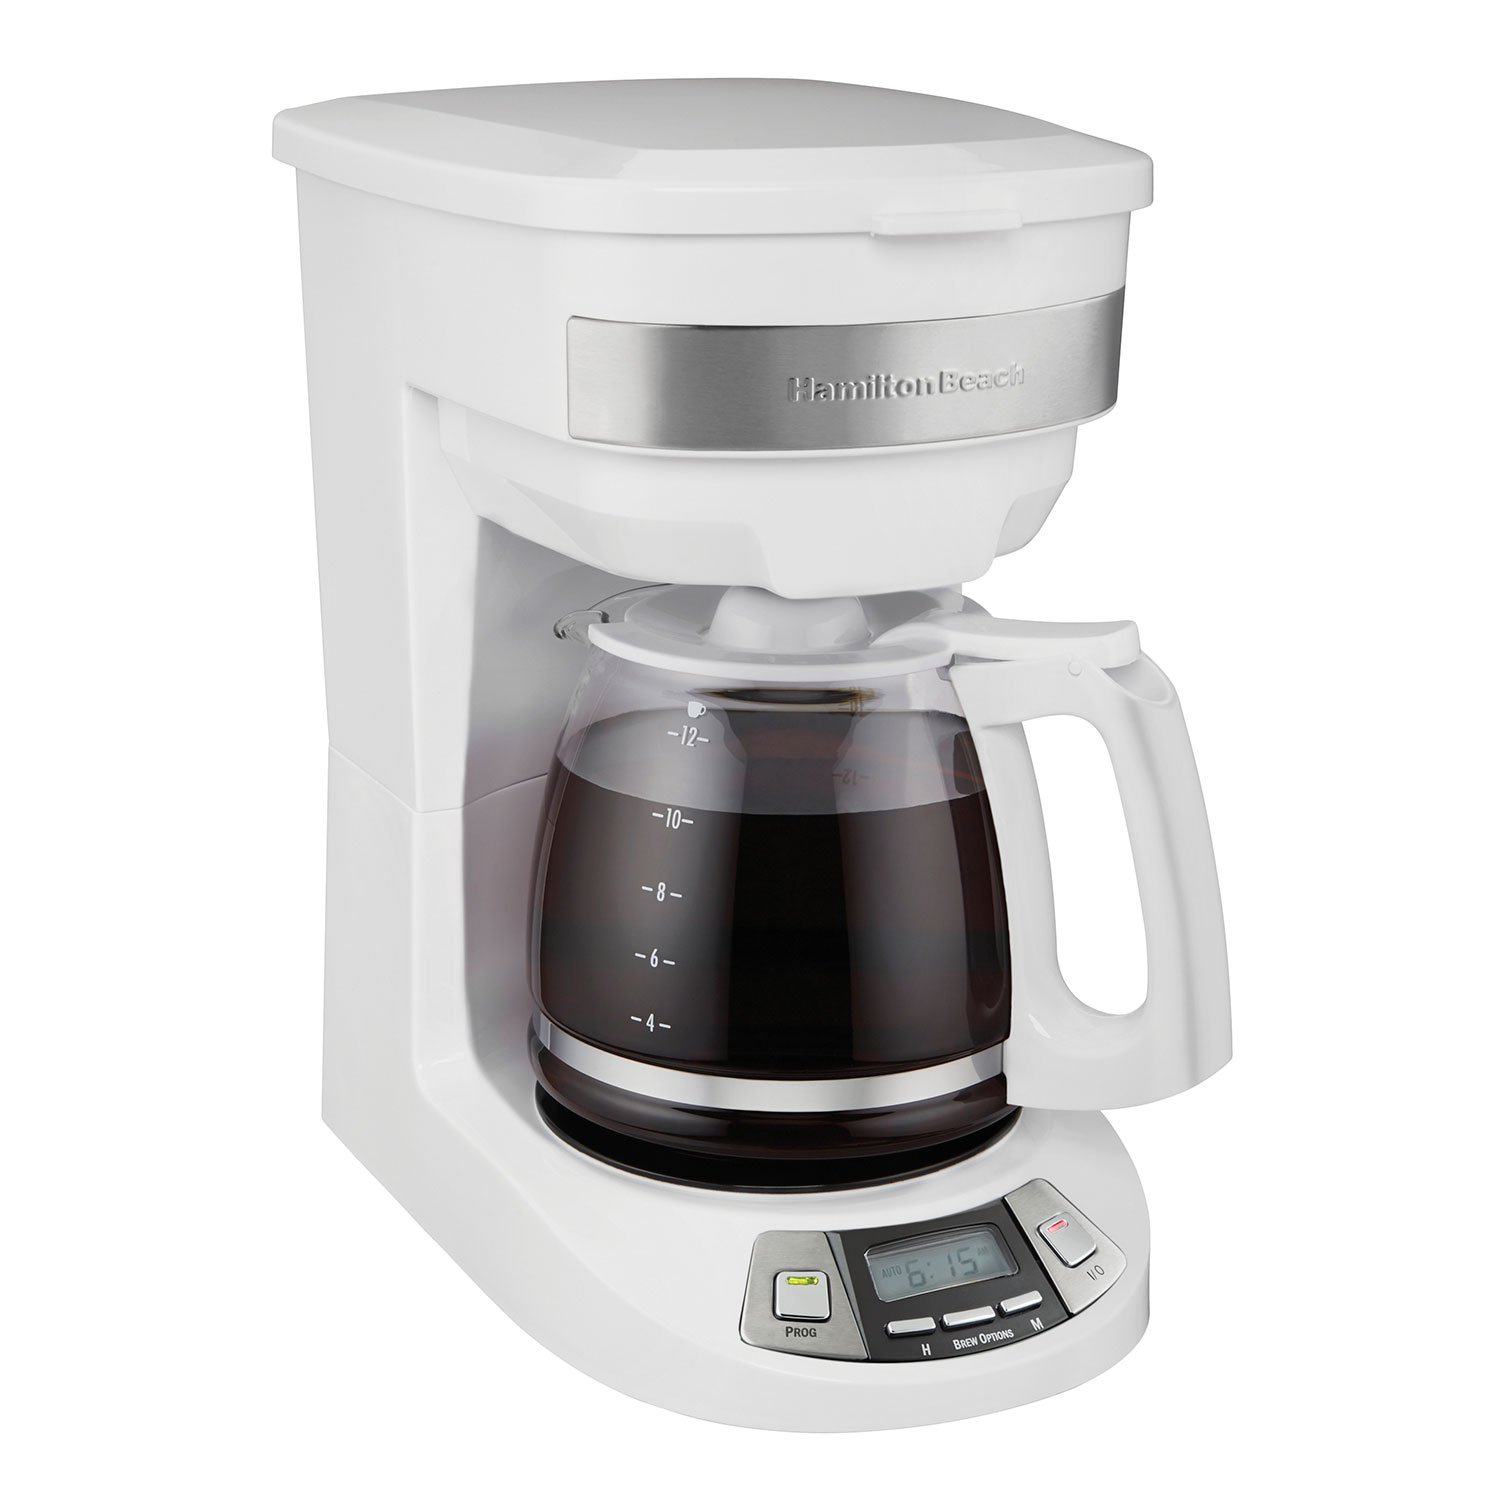 12 Cup Programmable Coffee Maker, White (46294)